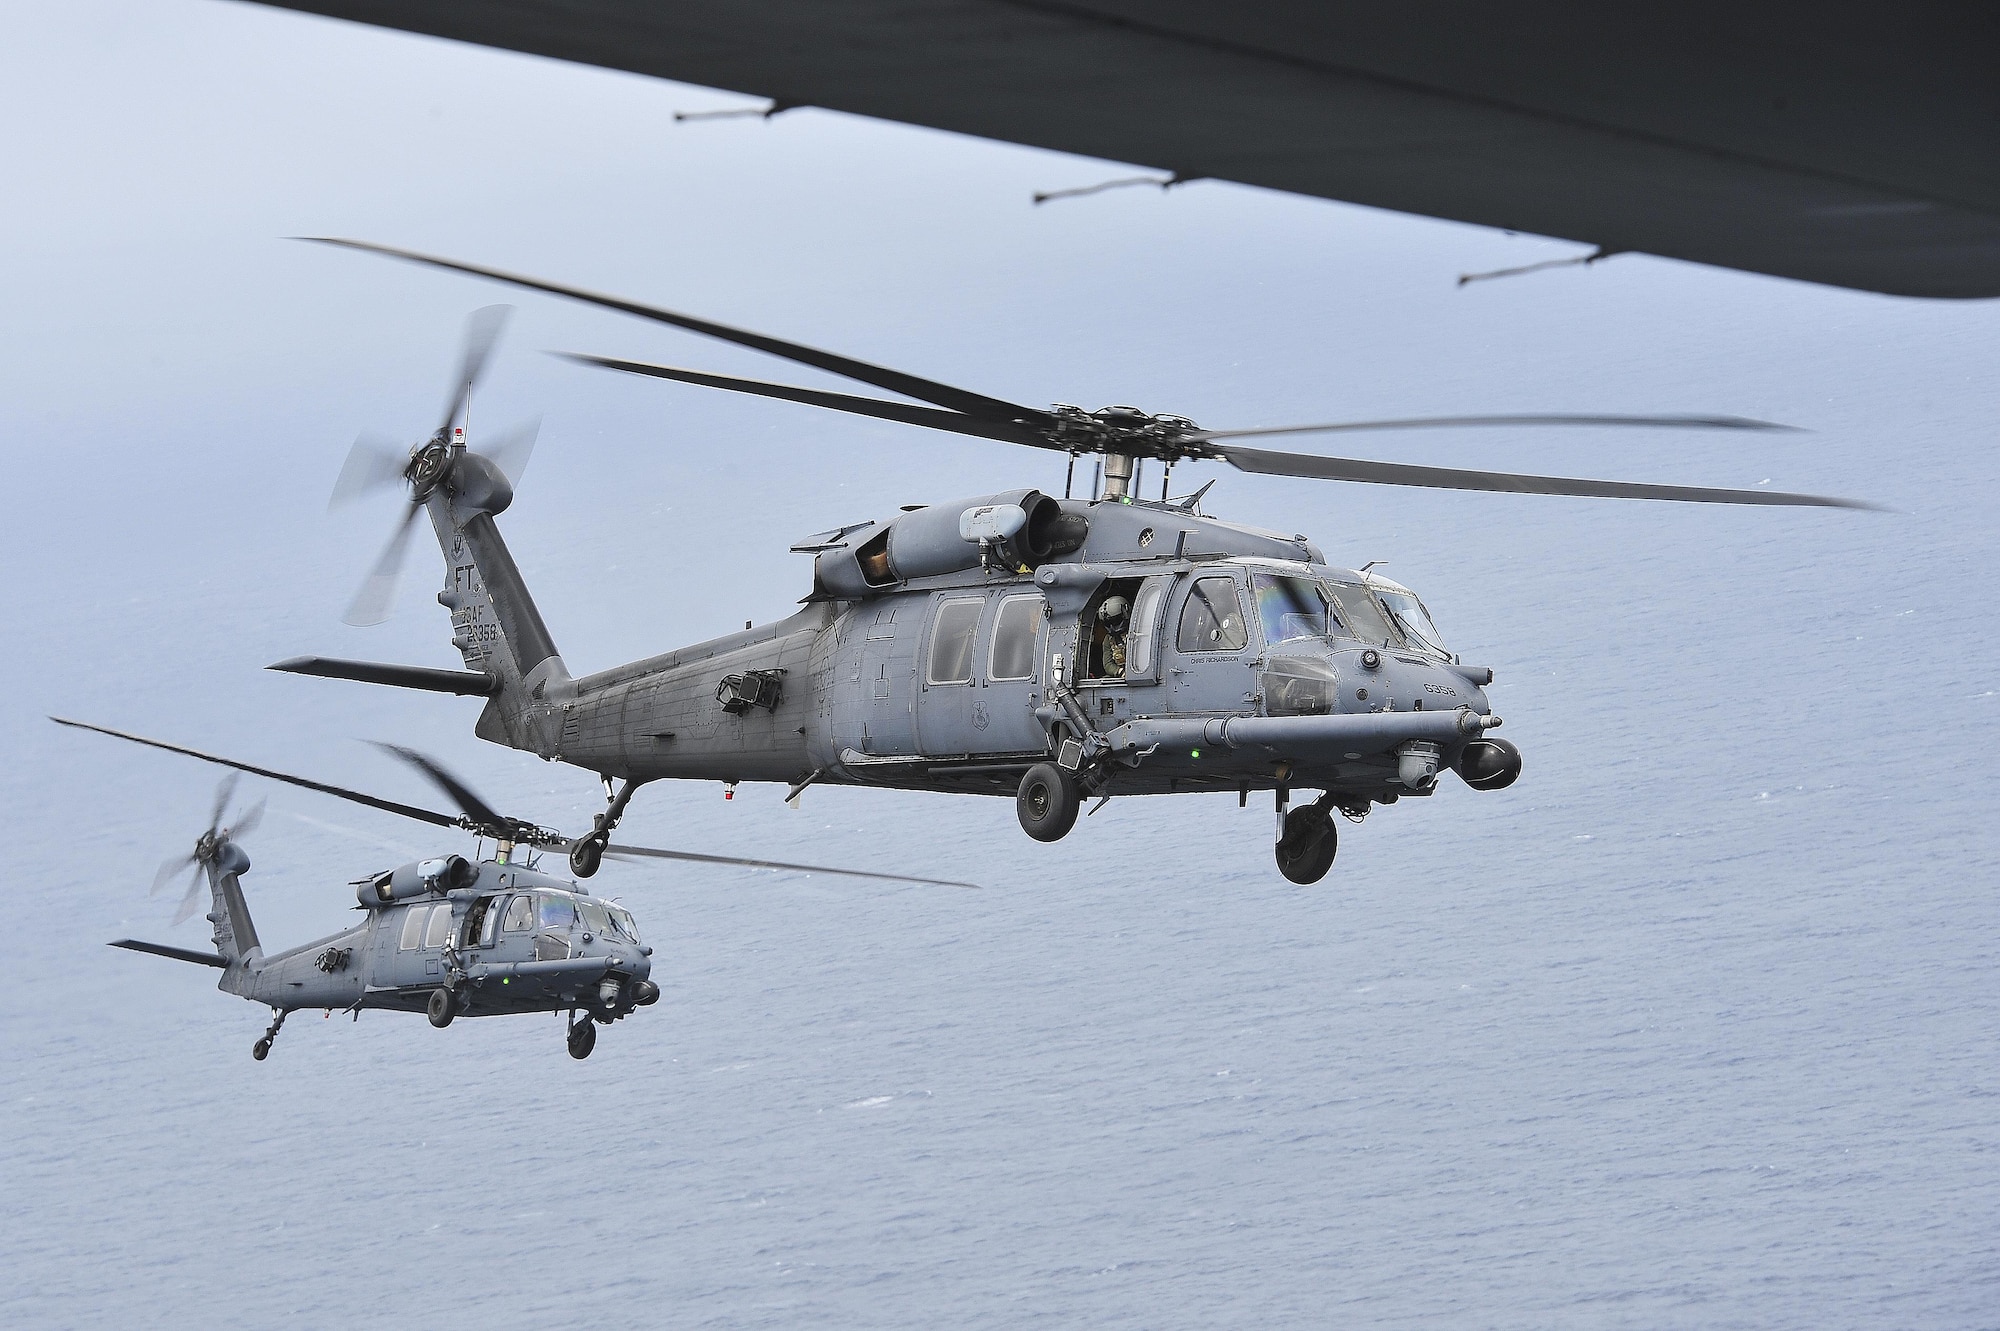 Two HH-60G Pave Hawk helicopters from the 41st Rescue Squadron, Moody Air Force Base, Ga., fly in formation in preparation for an air-to-air refueling with an MC-130P Combat Shadow over Hurlburt Field, Fla., May 15, 2015. The final two MC-130P Combat Shadow aircraft in the Air Force landed for the last time at Hurlburt Field, Fla., in front of more than 400 people and will take their last flight to the boneyard at Davis-Monthan Air Force Base, Arizona, June 1. (U.S. Air Force photo/Senior Airman Jeff Parkinson)